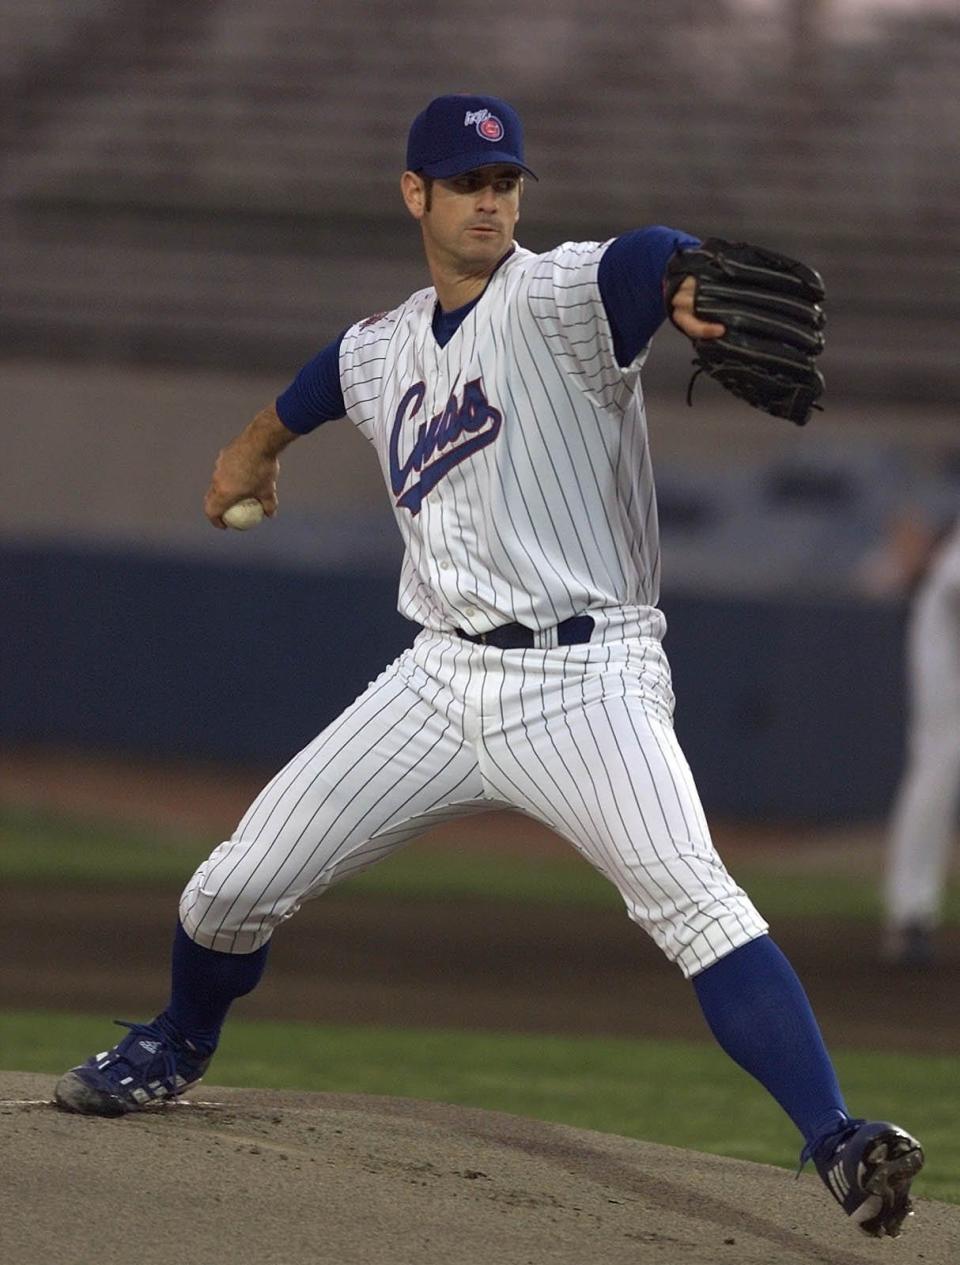 Iowa Cubs pitcher Mark Prior delivers against a Tucson Sidewinders batter on May 7, 2002, at Principal Park.